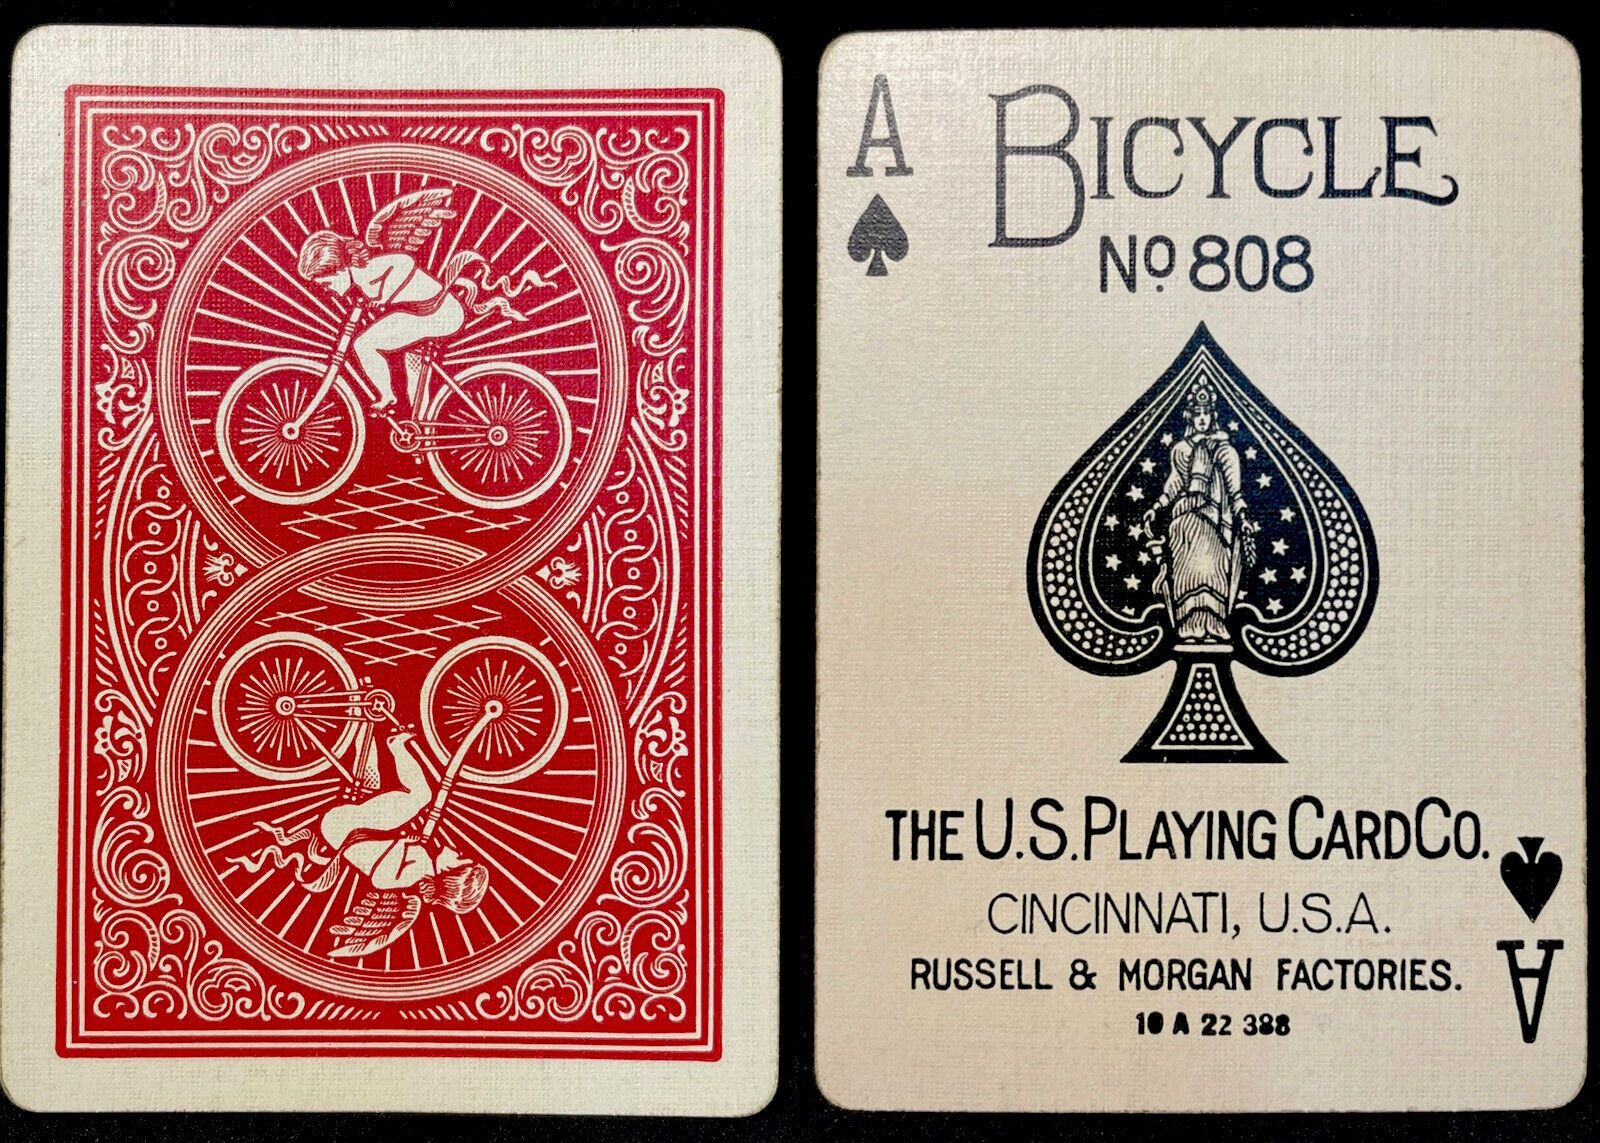 c1905 Bicycle Antique Playing Cards 52/52 USPCC R&M Fact Rare Cupid Poker Deck